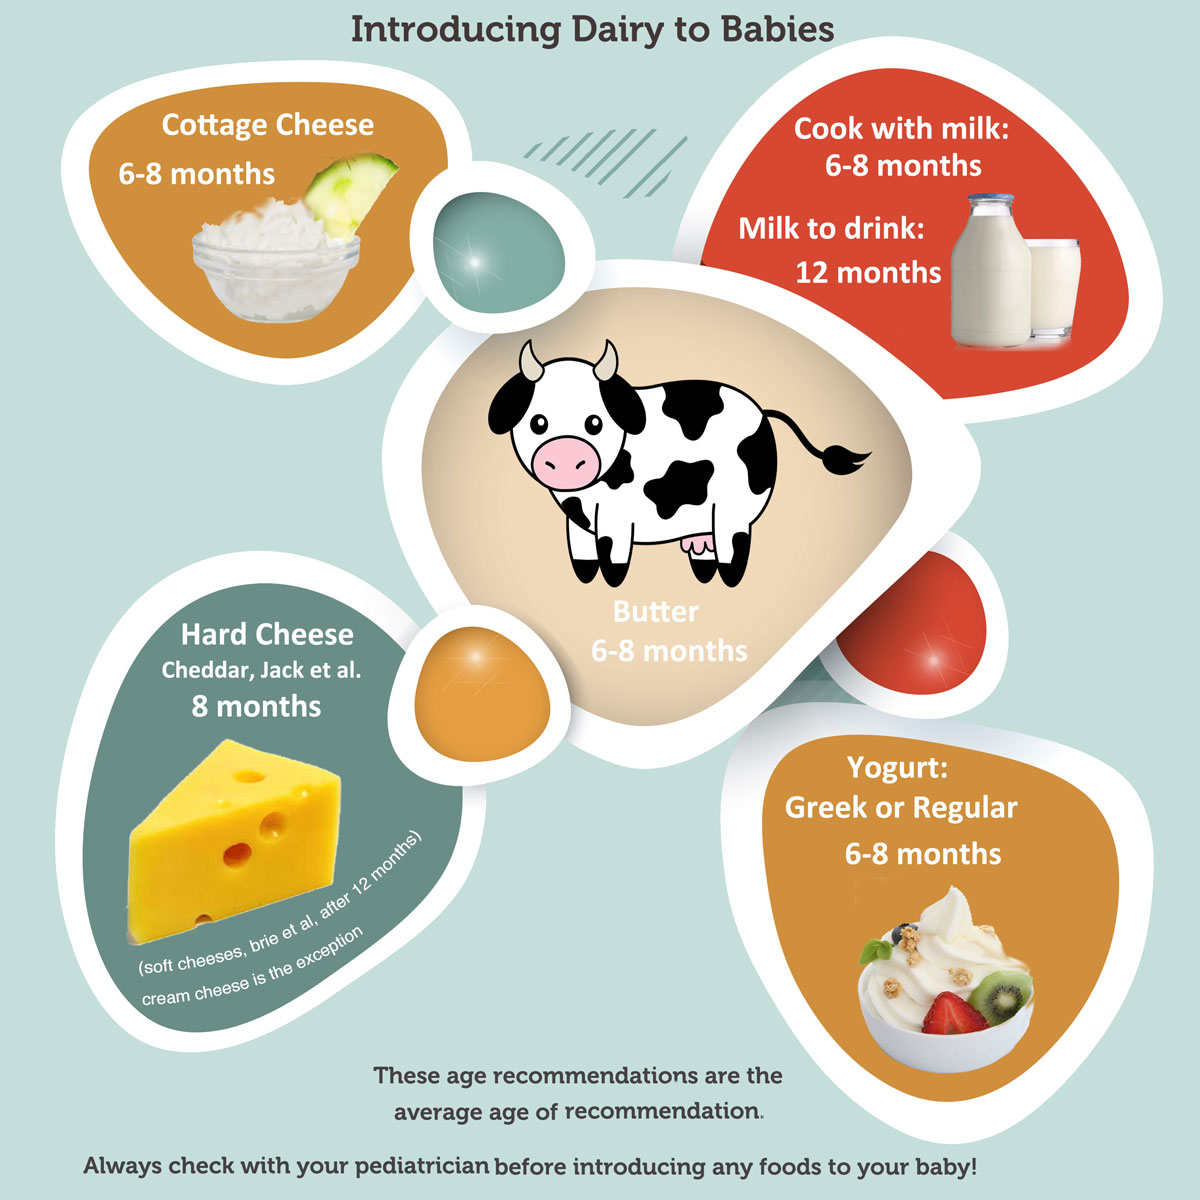 dairy-infographic-when-to-introduce-milk-and-dairy-products-wholesome-baby-food-guide